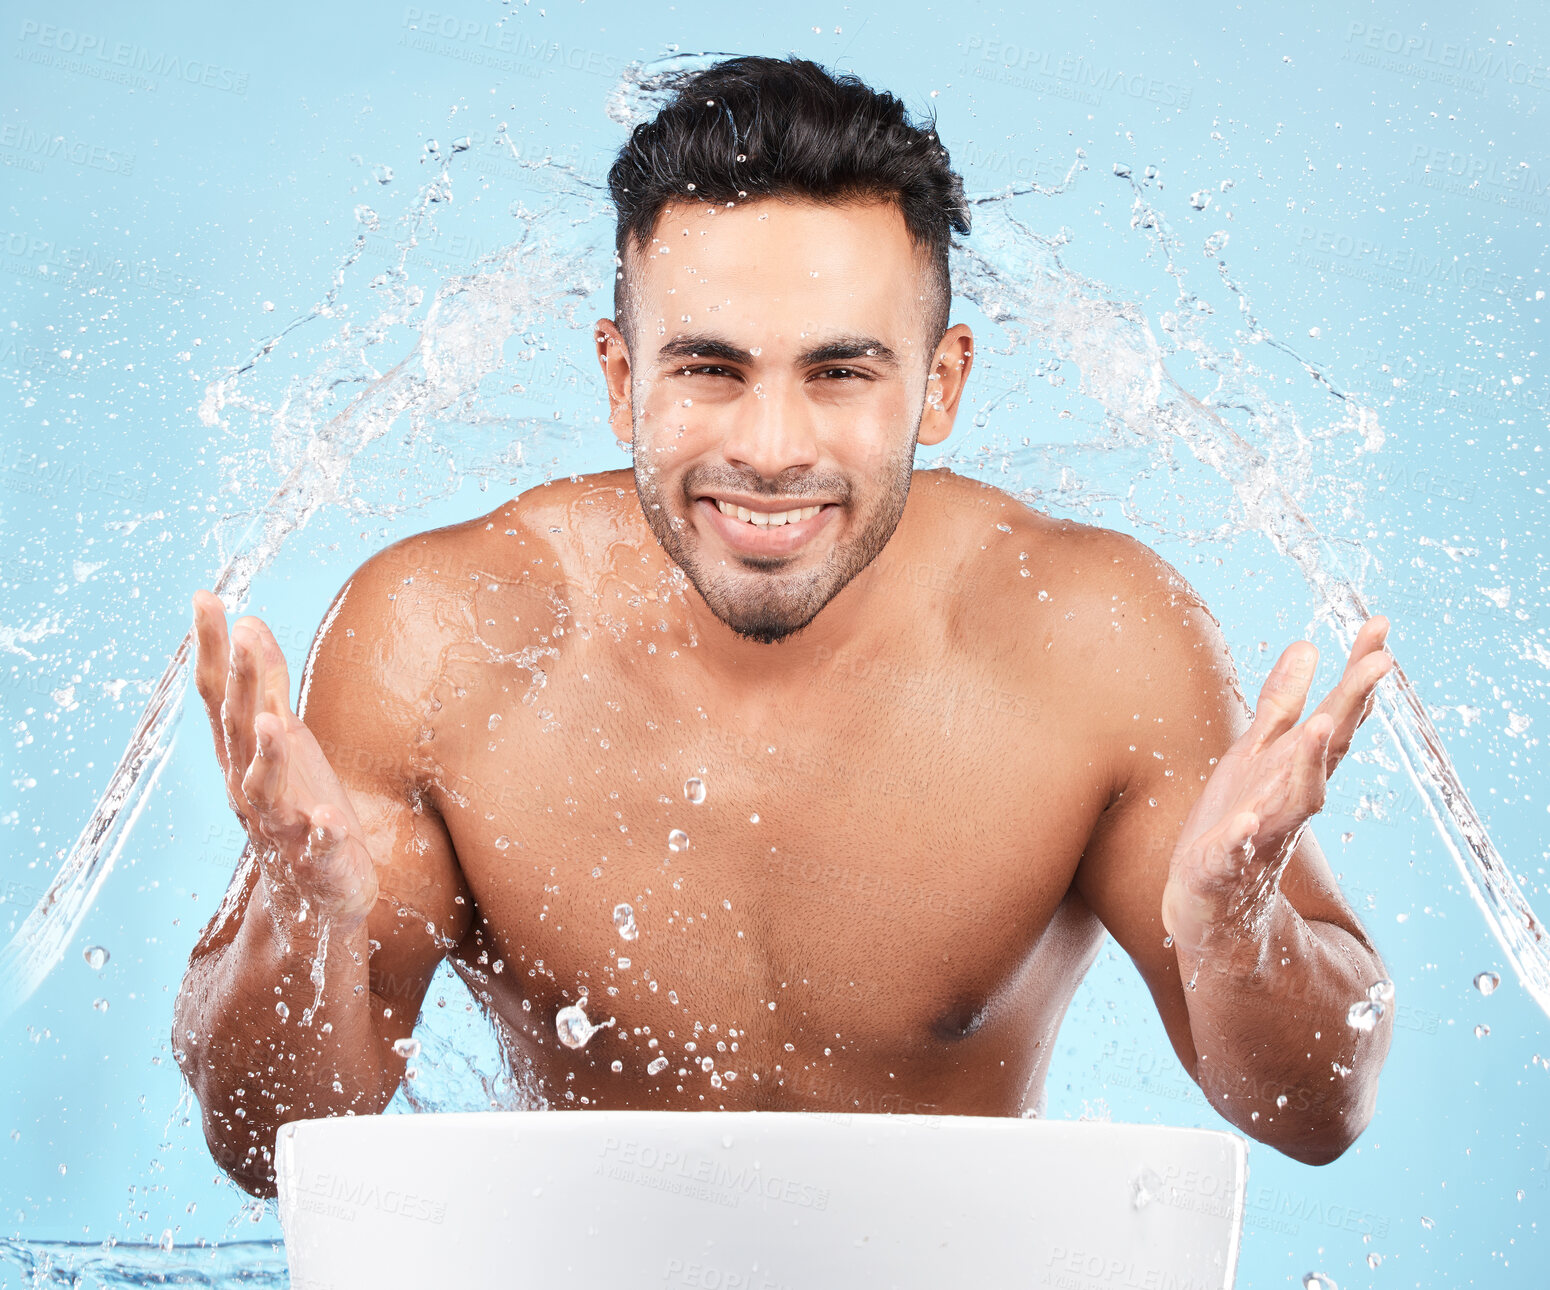 Buy stock photo Cleaning, water splash and portrait of man happy with self care routine, facial hygiene and body hygiene wash. Water drop, bathroom skincare hydration and beauty model with health wellness treatment